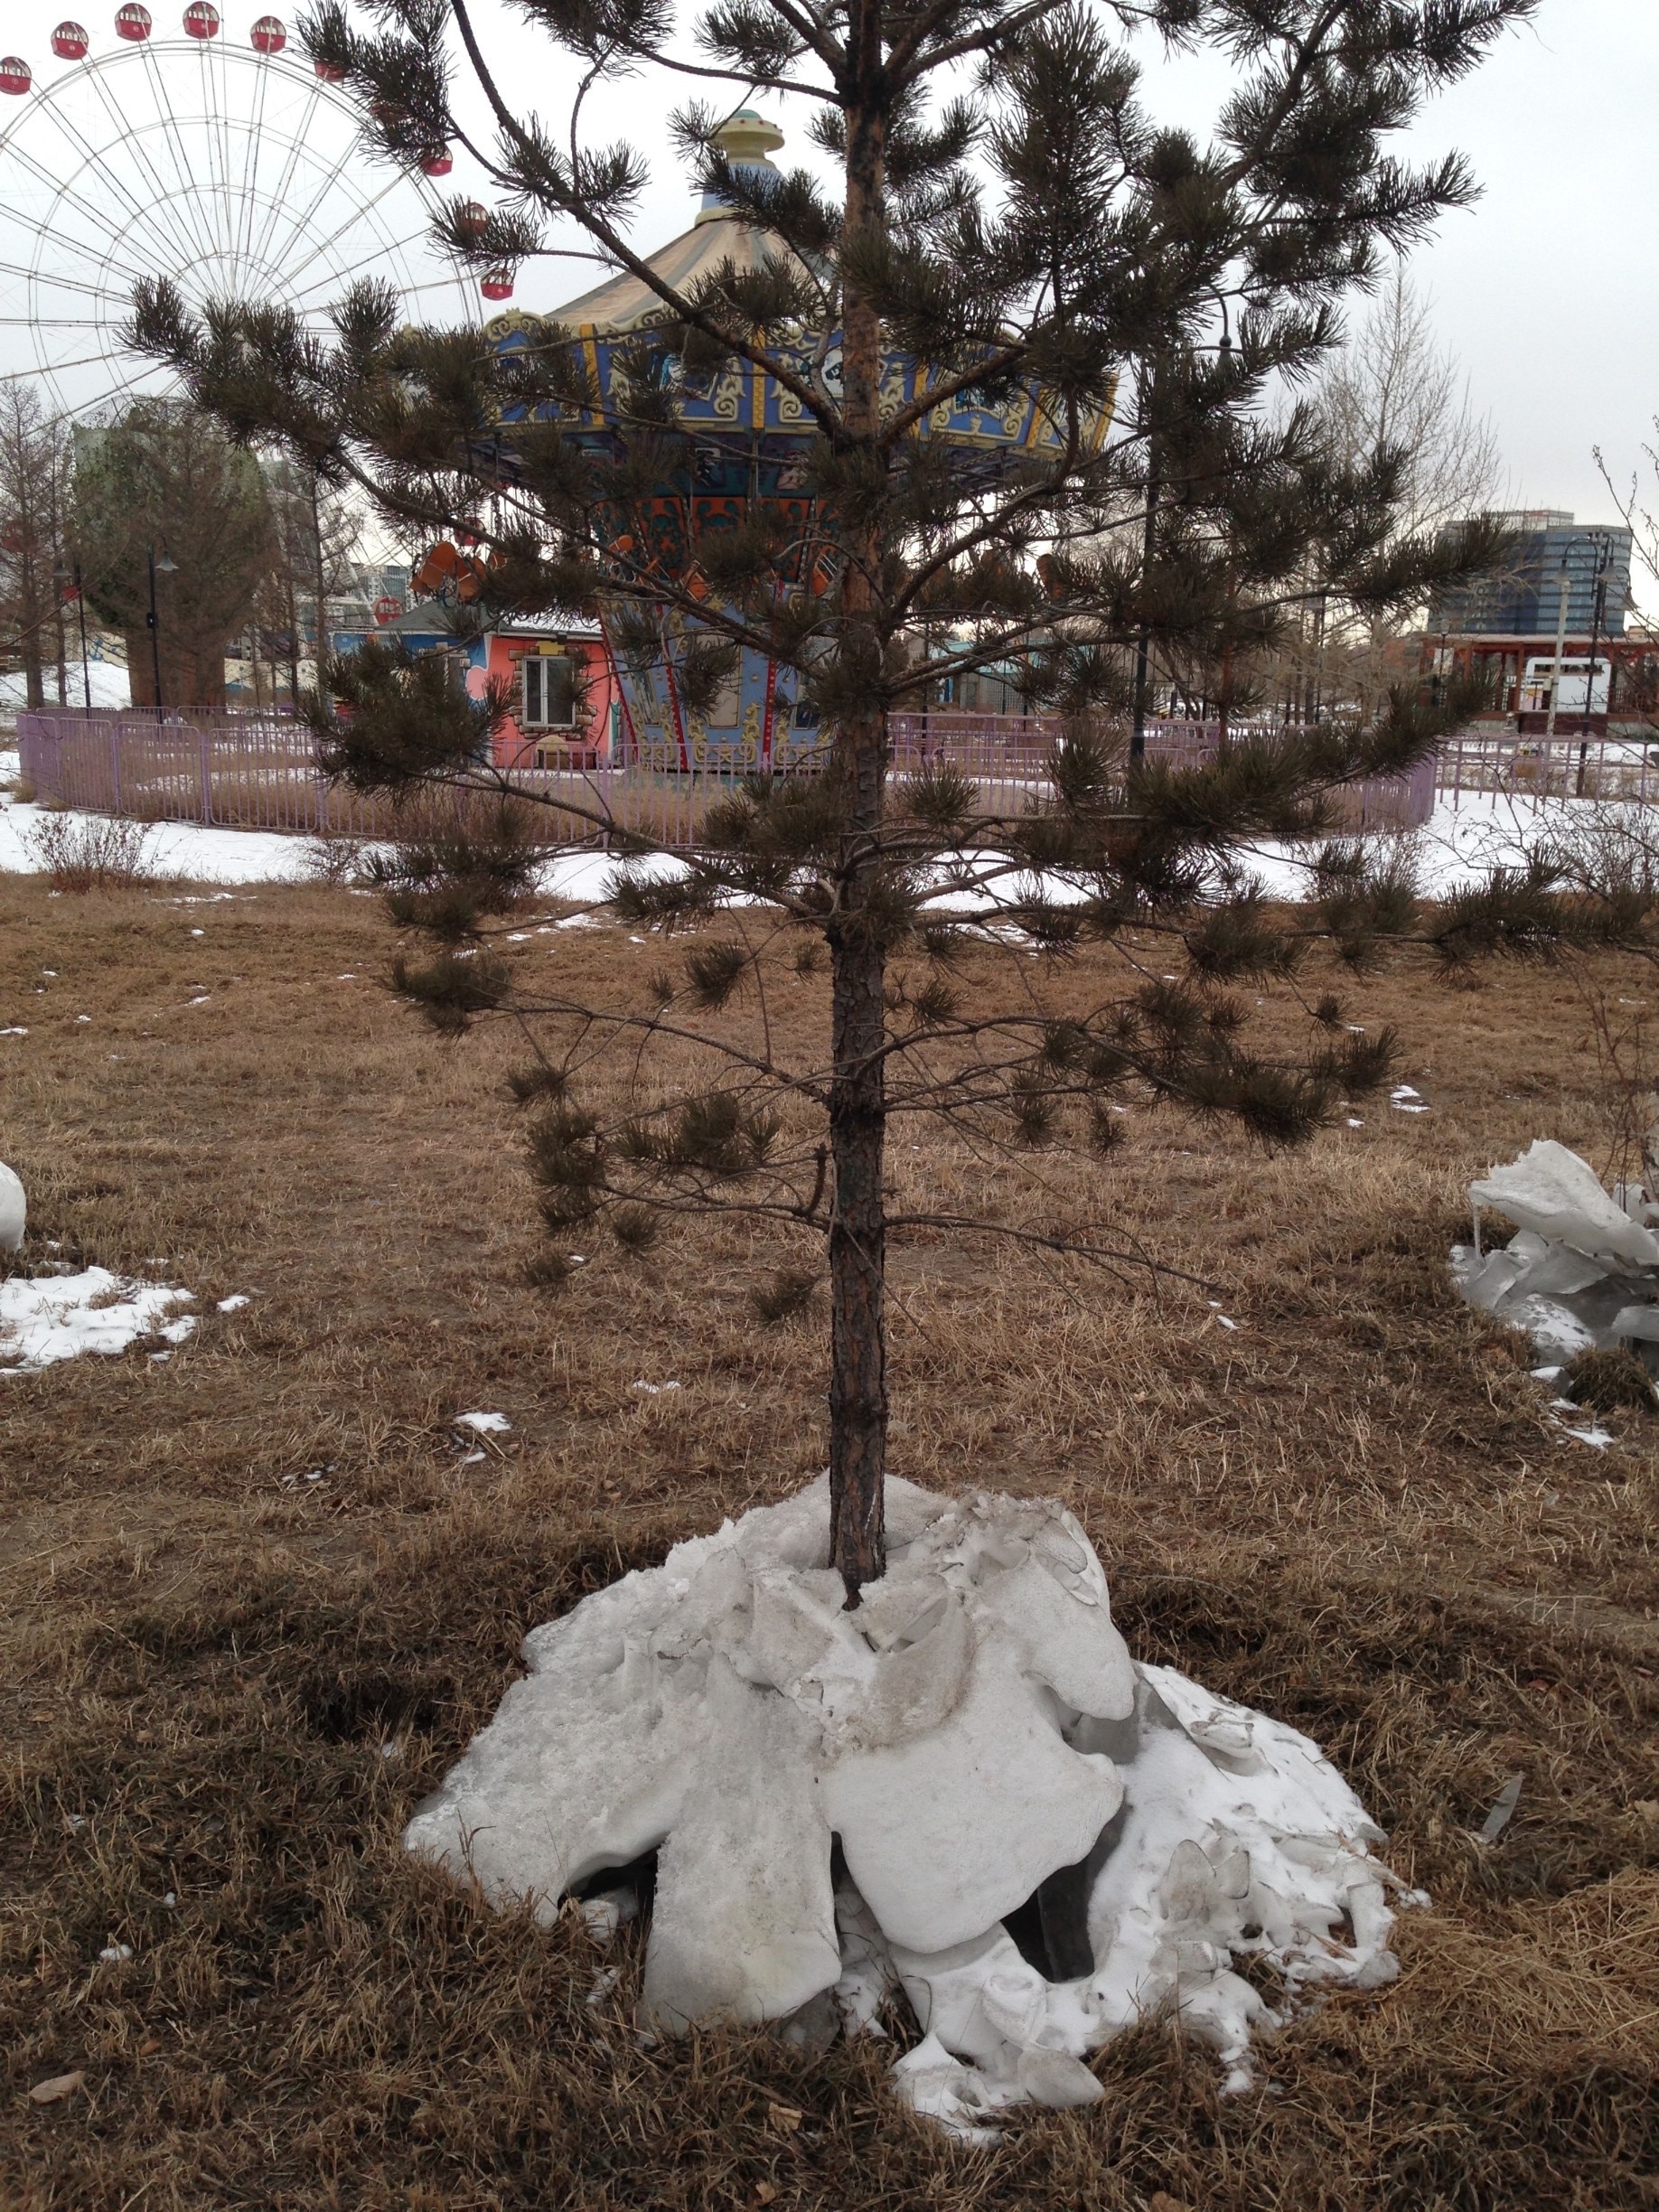 How to water a tree in Ulaanbaatar - break up the blocks of ice and leave around the base of the tree. Now wait until Spring!